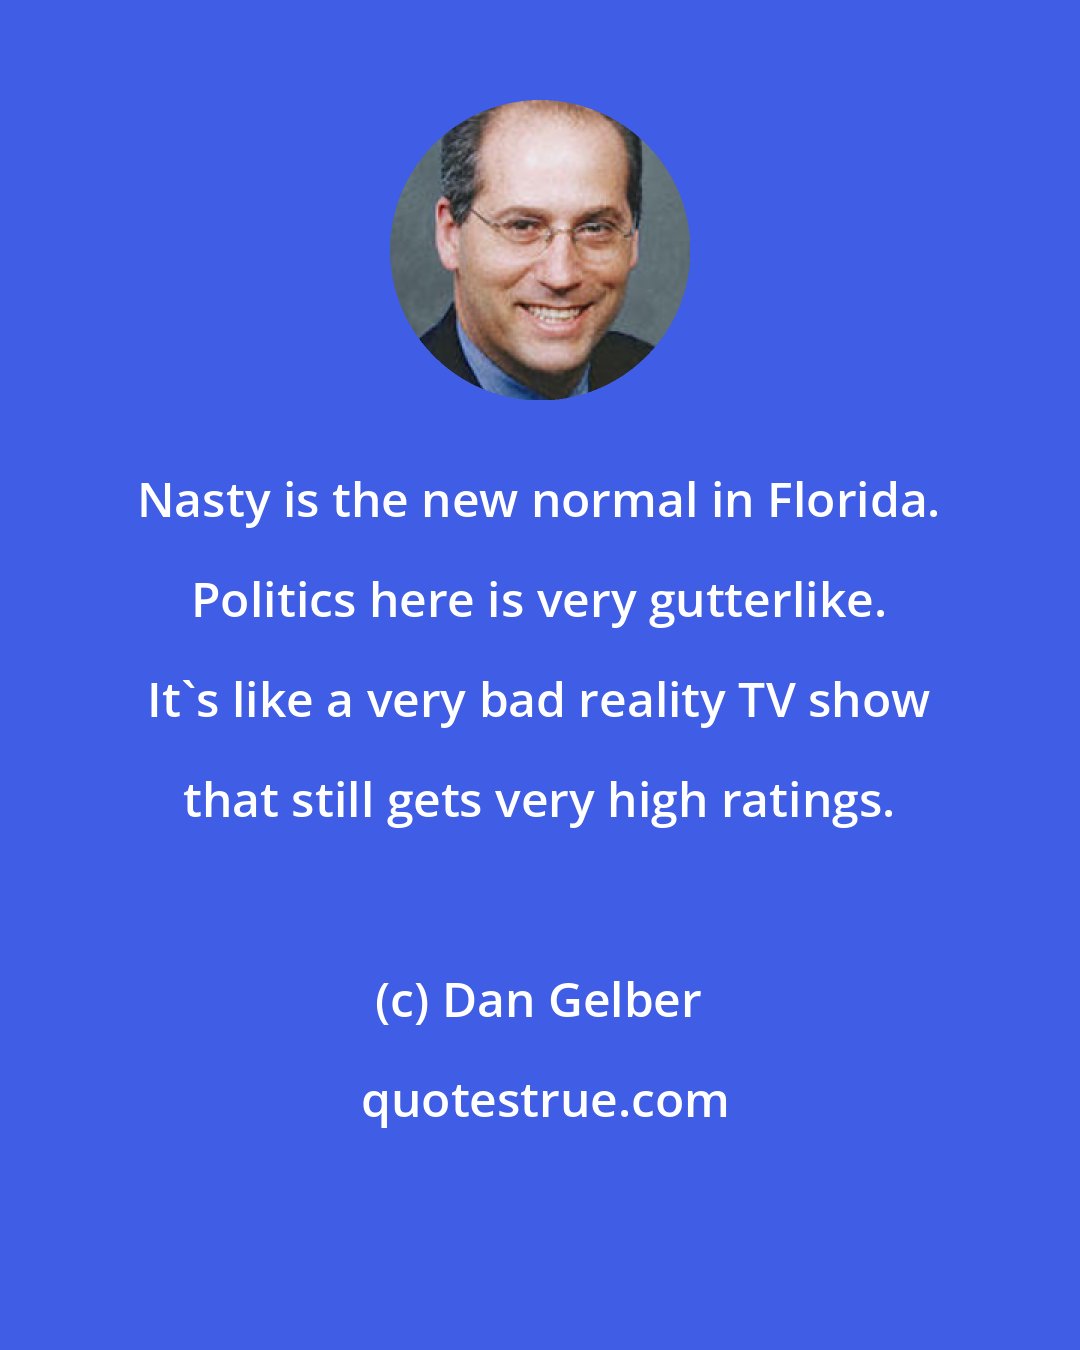 Dan Gelber: Nasty is the new normal in Florida. Politics here is very gutterlike. It's like a very bad reality TV show that still gets very high ratings.